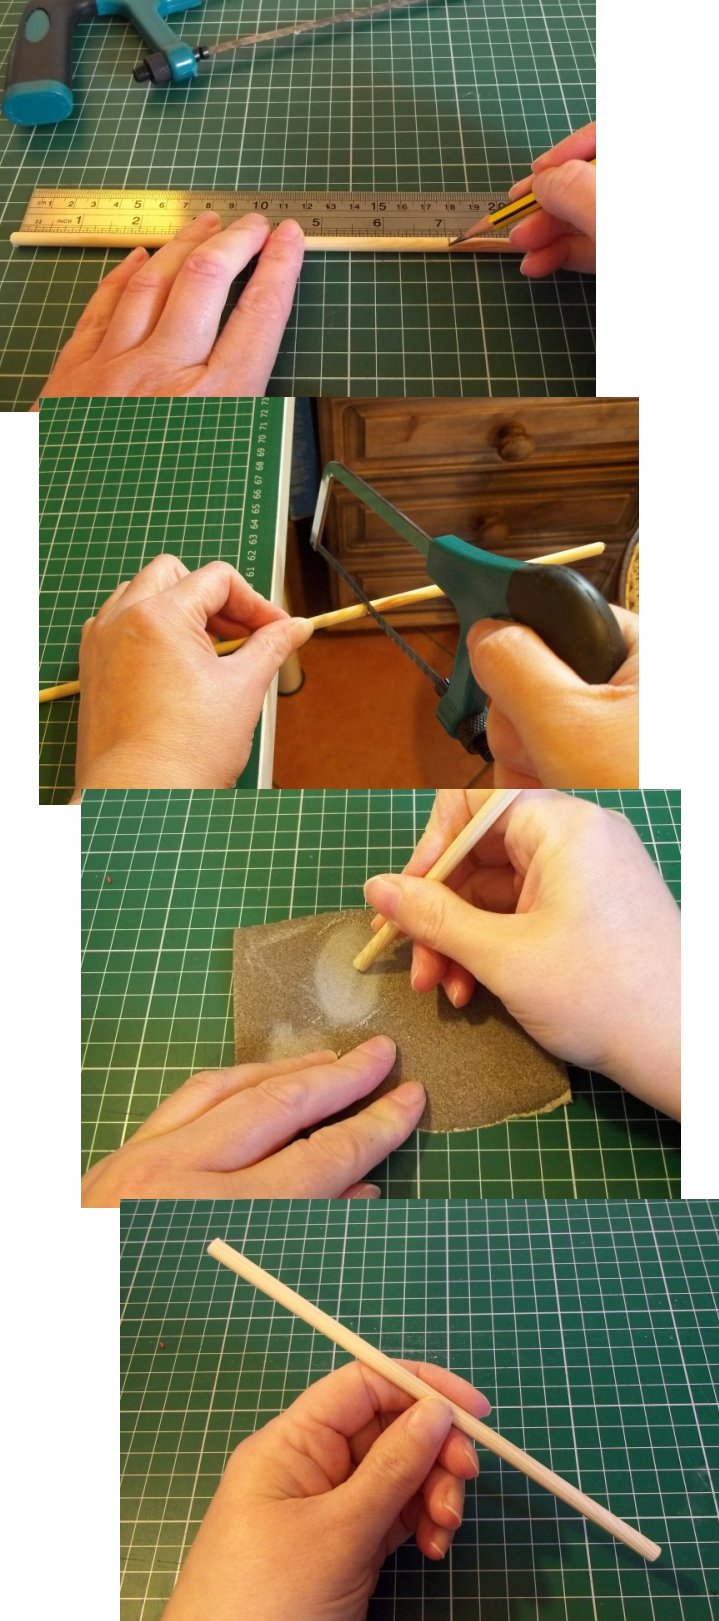 Things to make and do - Hand Drum 